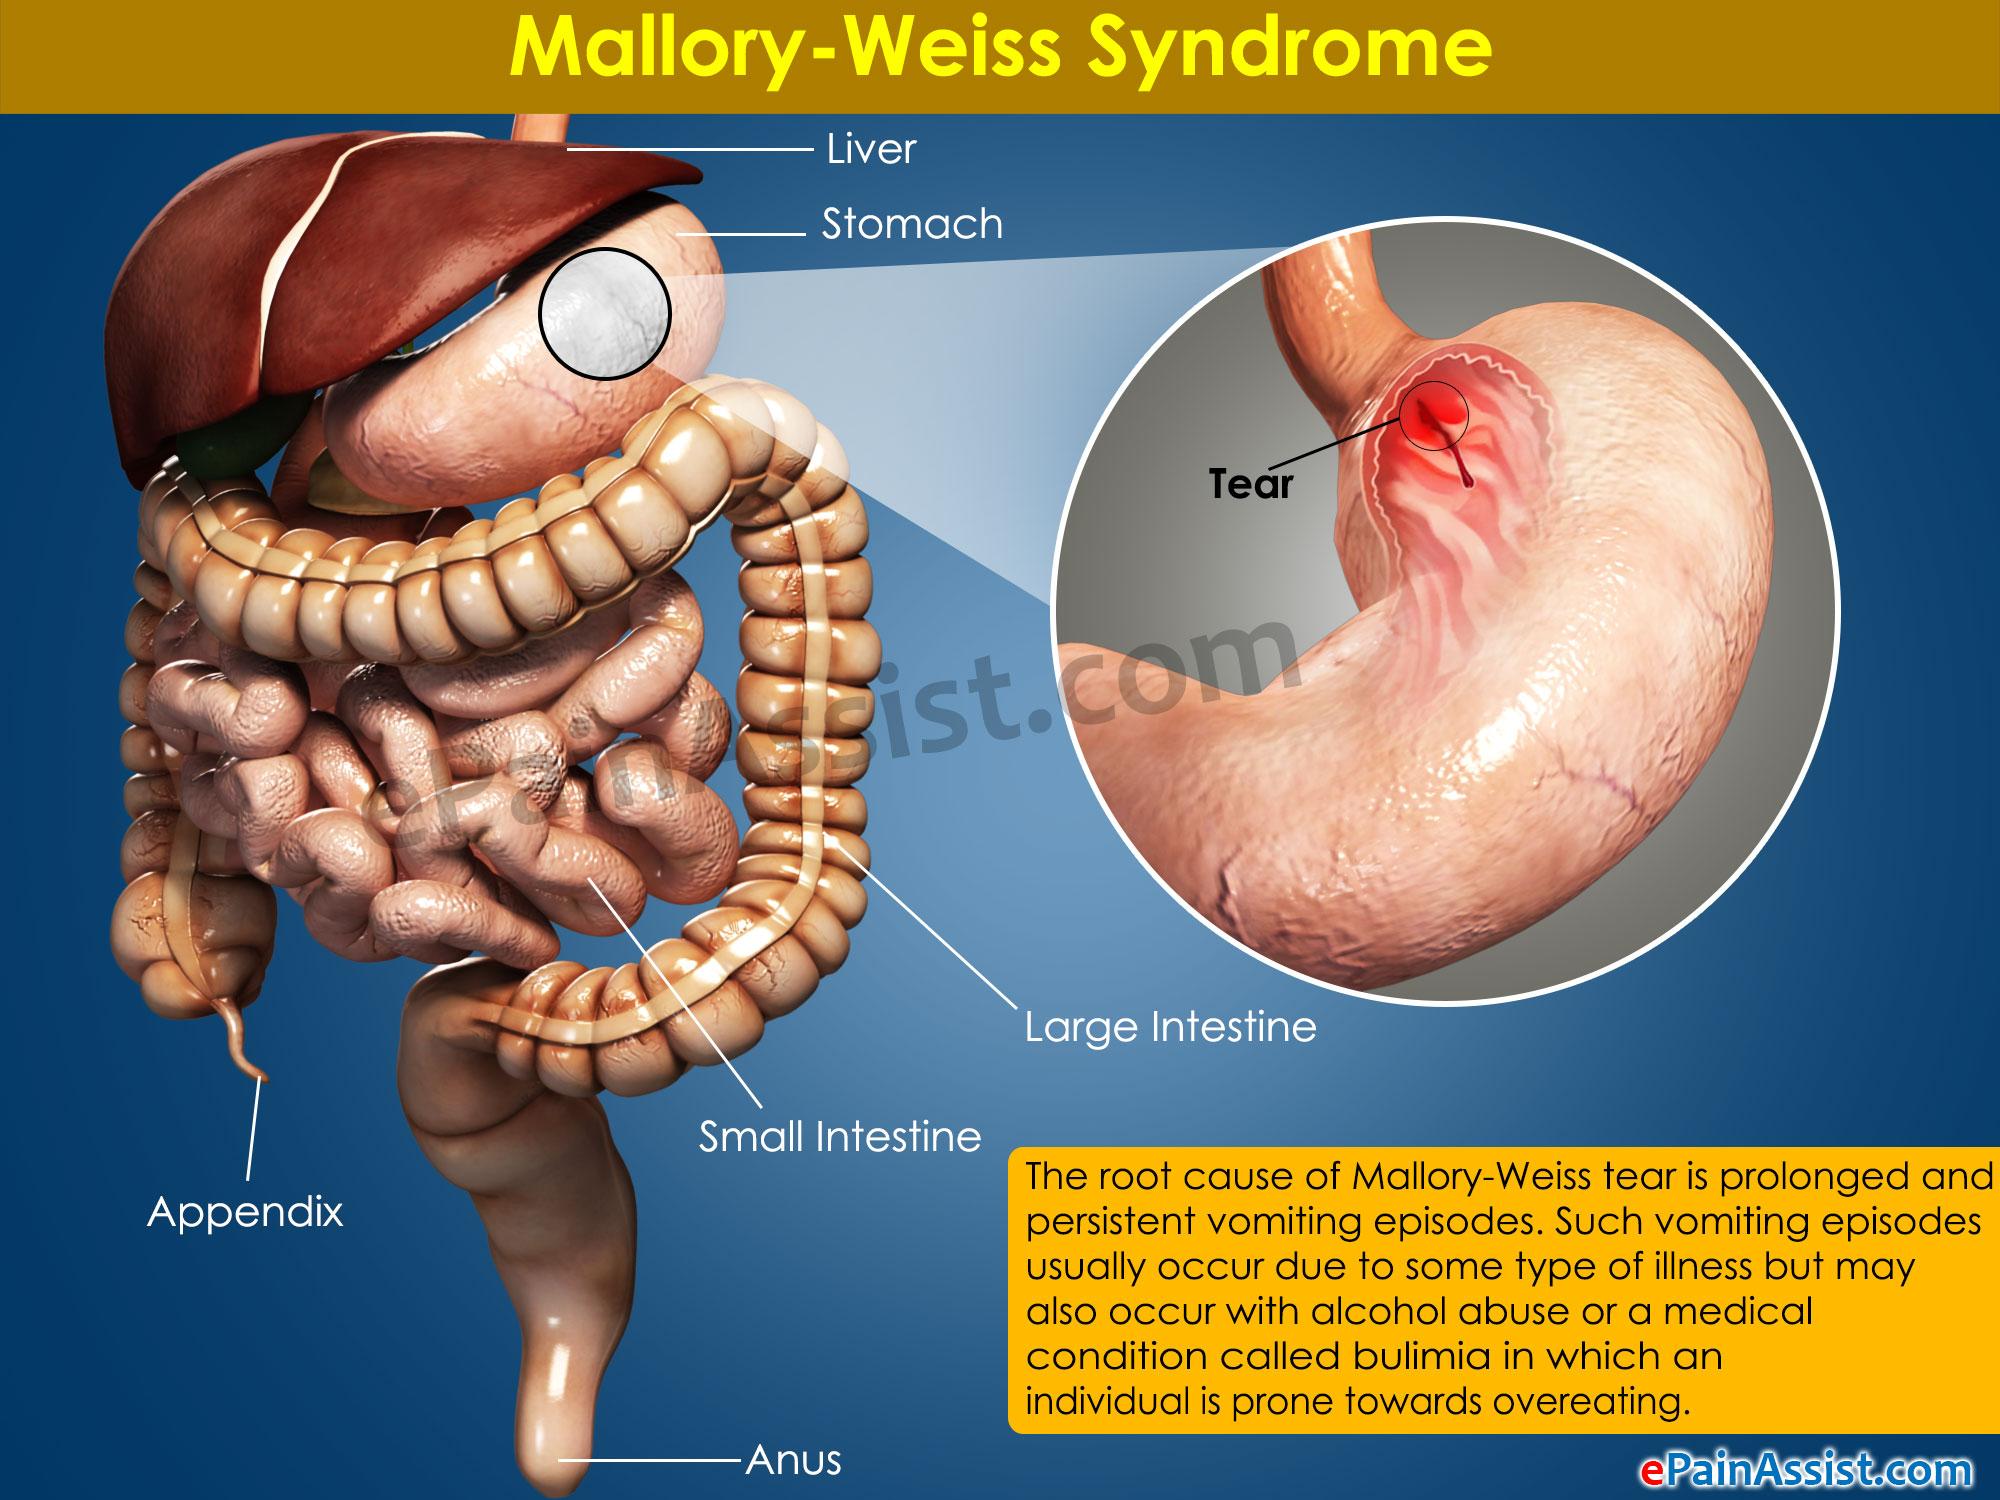 10 Symptoms of Mallory-Weiss syndrome You Should Never Ignore